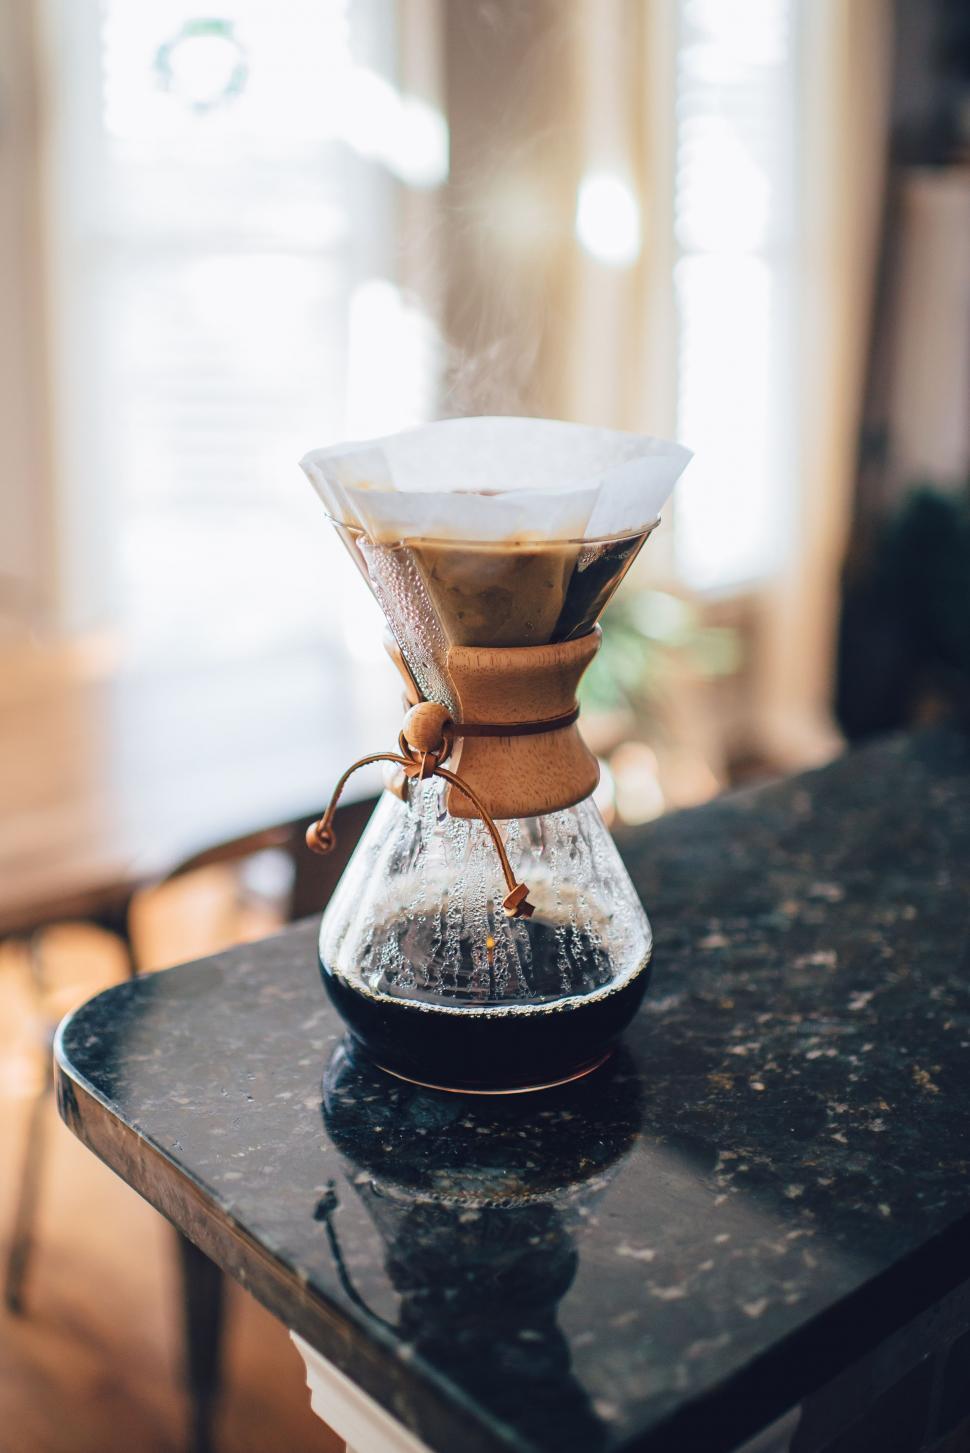 Free Image of Pour over coffee 